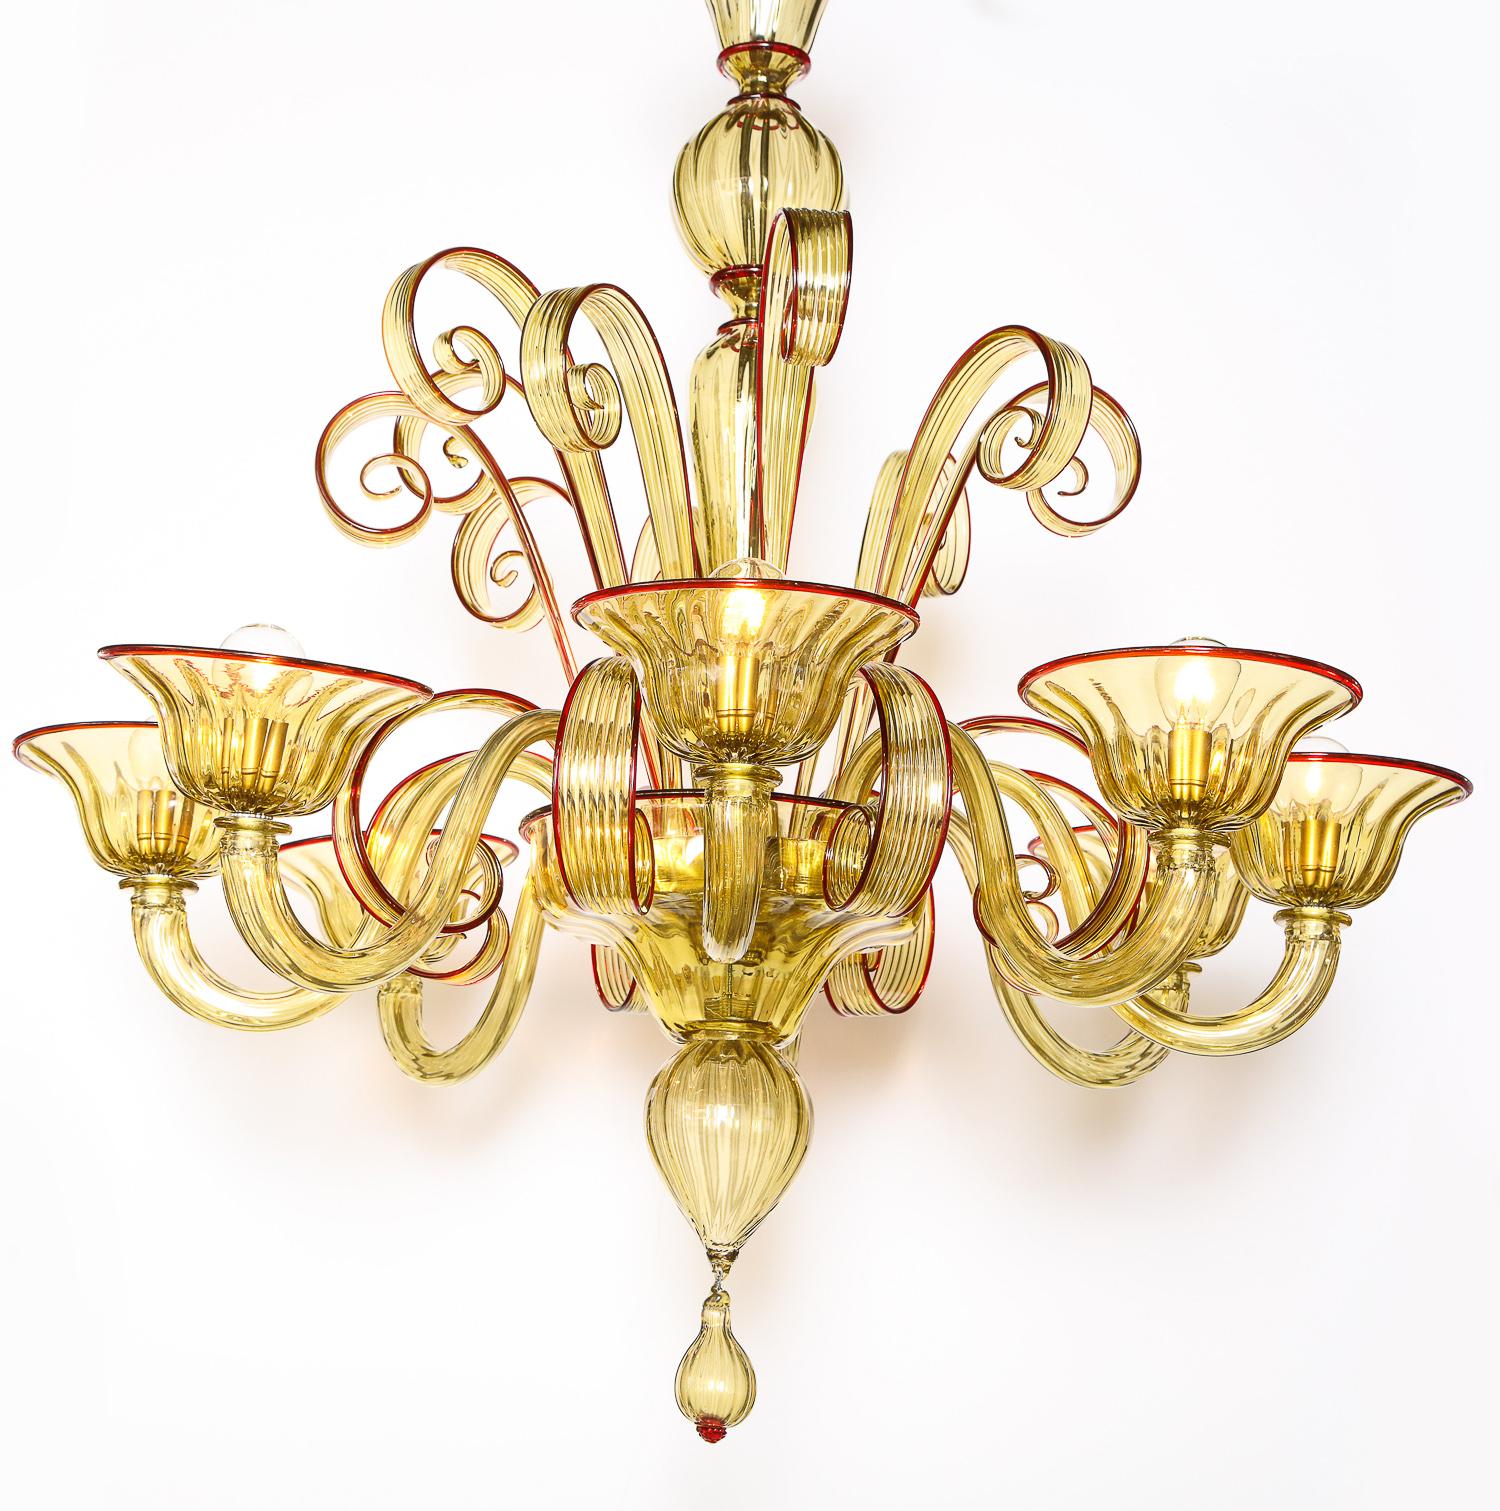 Italian Venetian Glass Chandelier, Amber Color/Red, Contemporary, 8 Arms, Murano, Italy For Sale